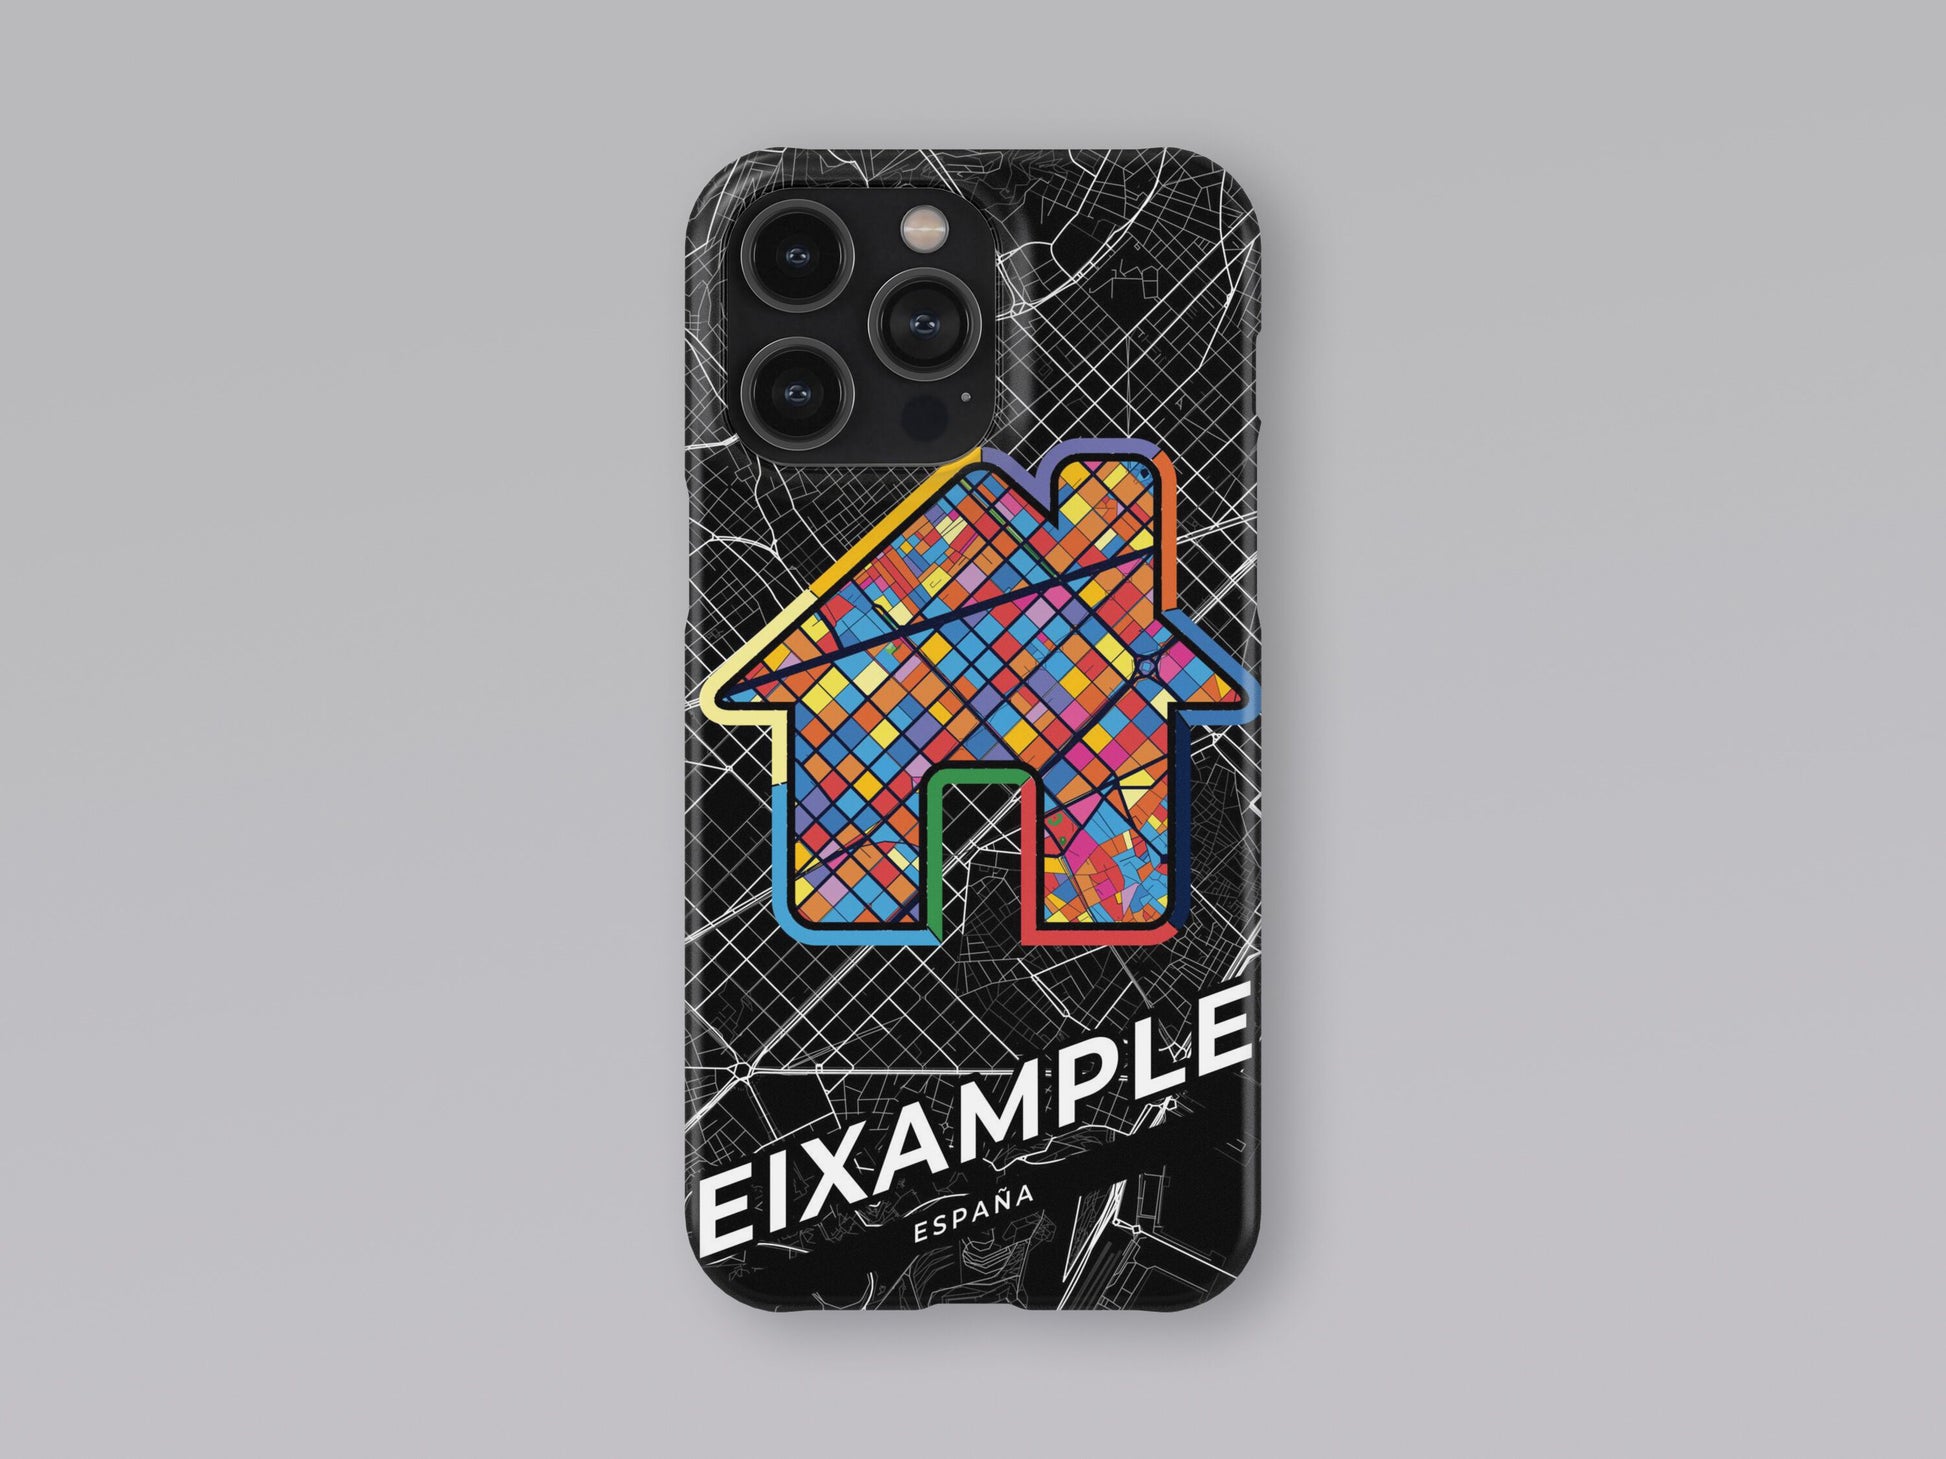 Eixample Spain slim phone case with colorful icon. Birthday, wedding or housewarming gift. Couple match cases. 3